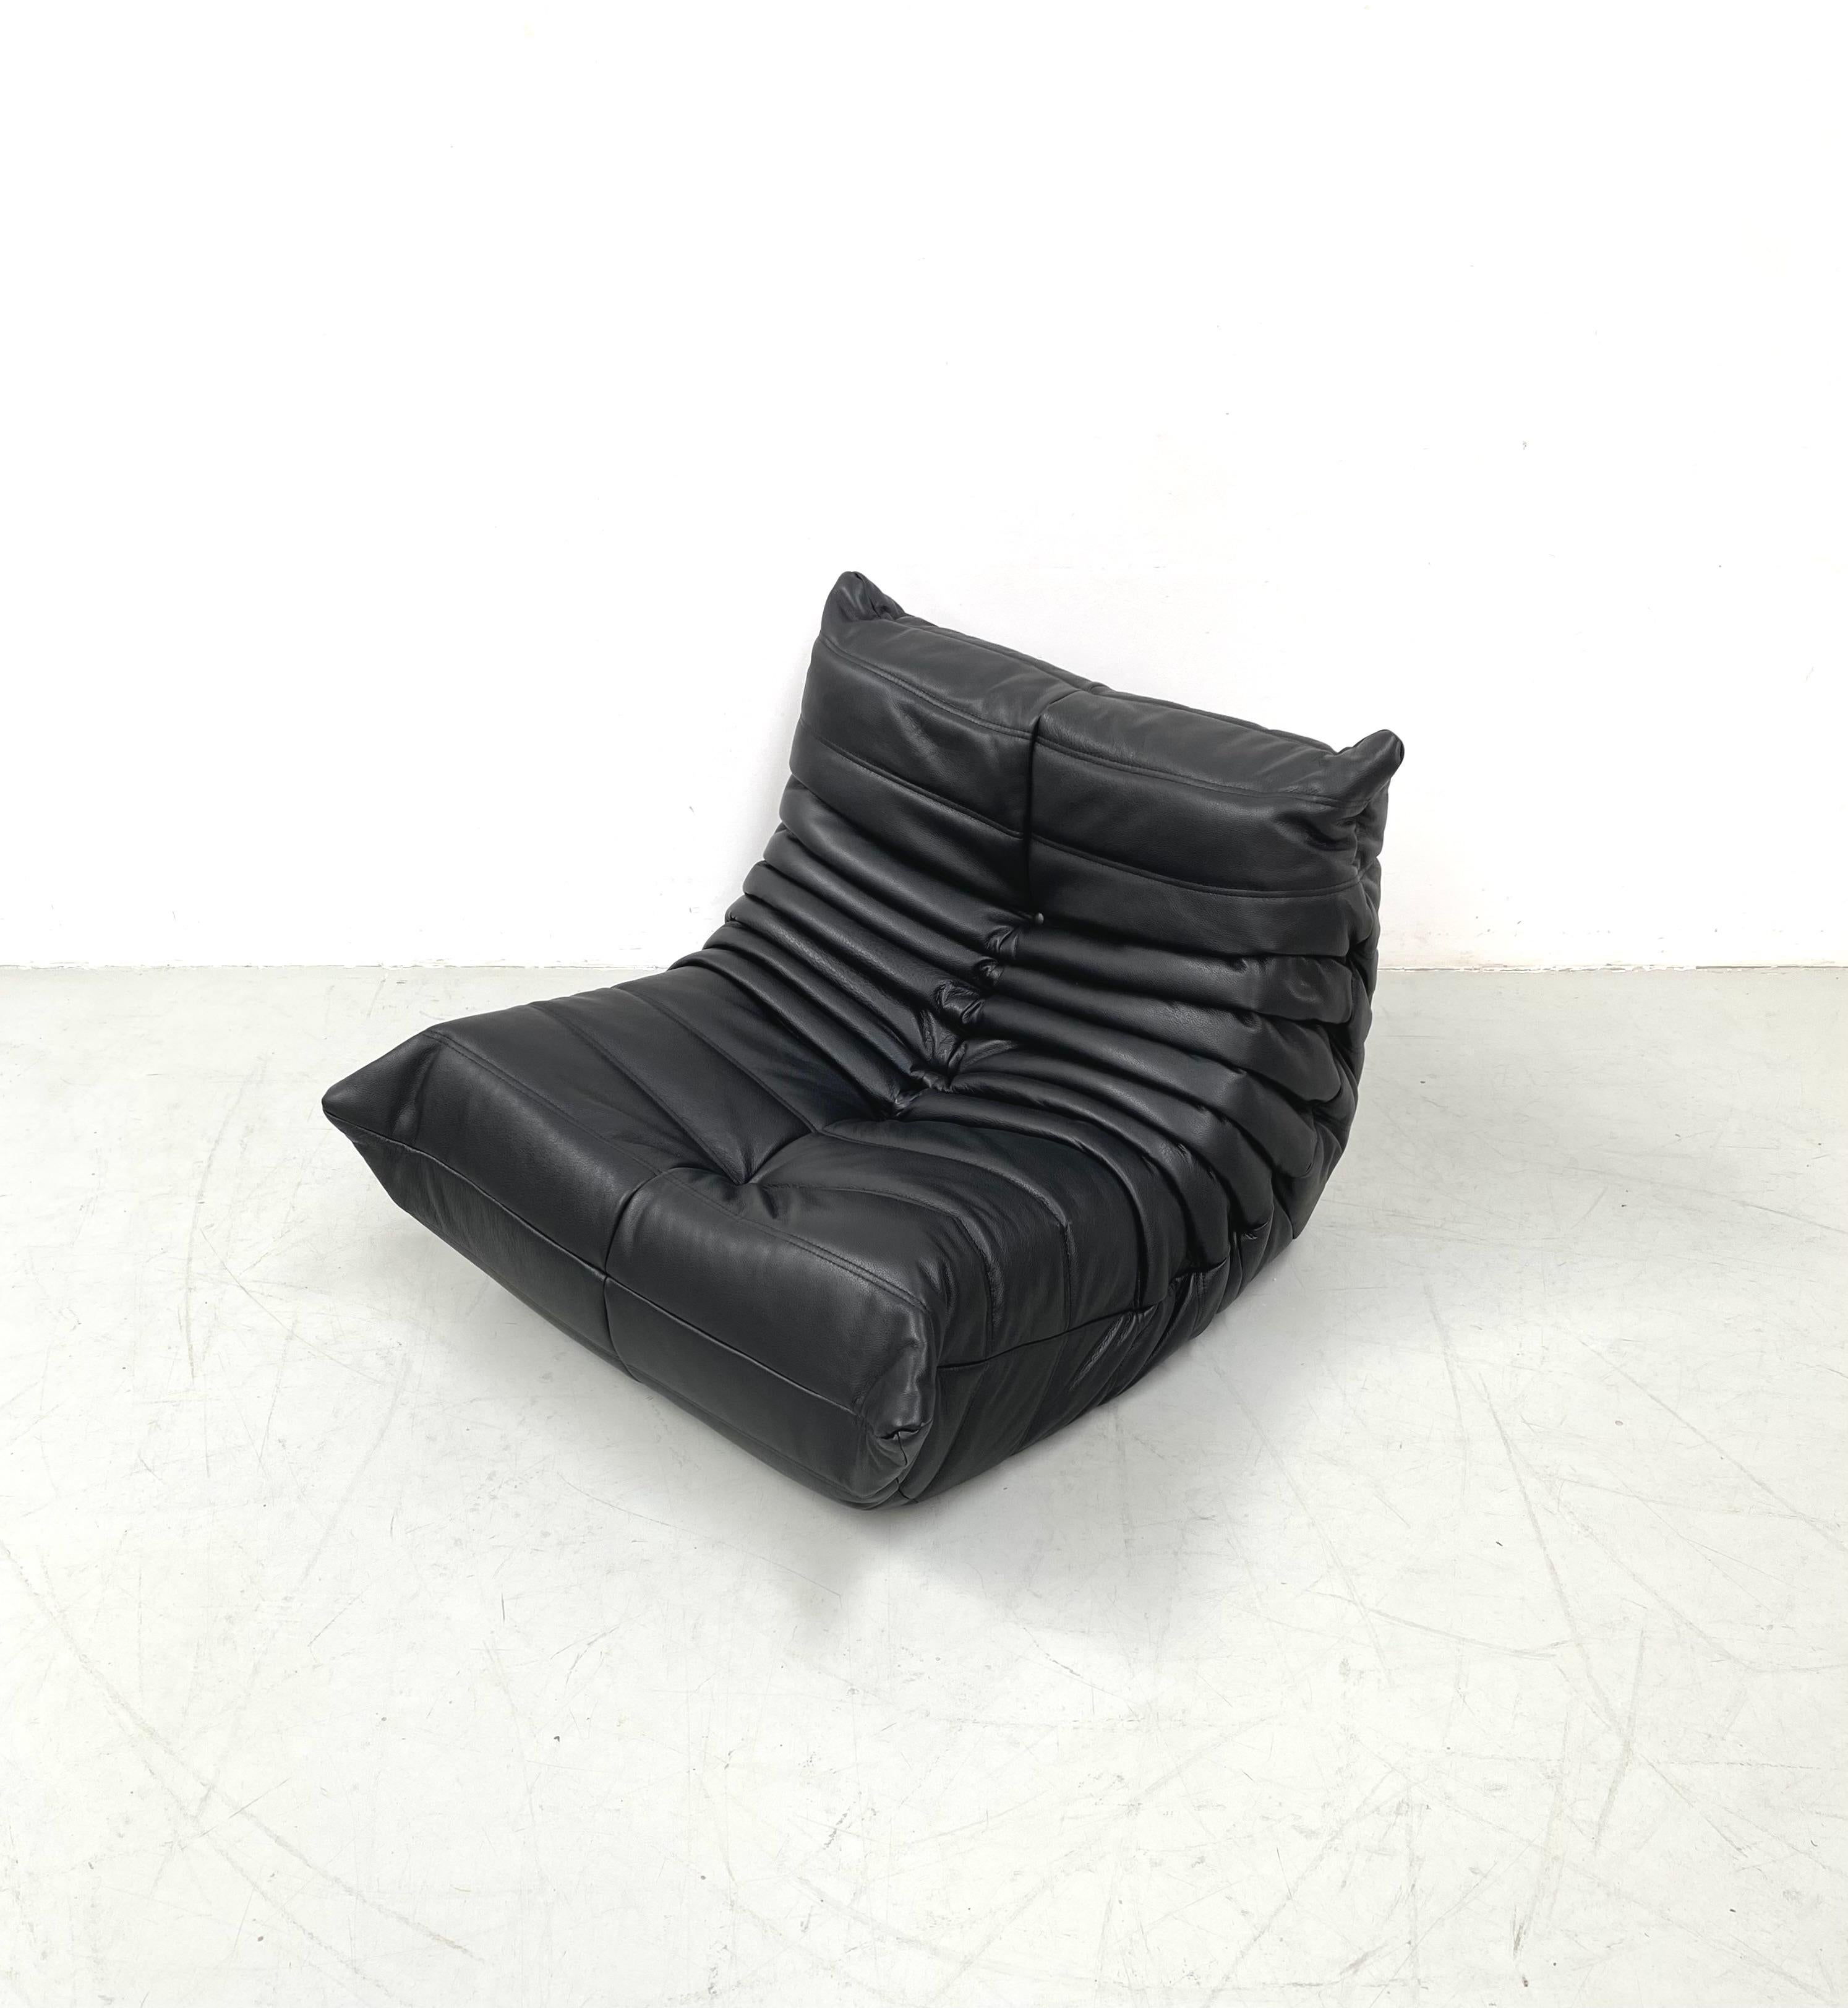 20th Century French Togo Chair in Black Leather by Michel Ducaroy for Ligne Roset. For Sale